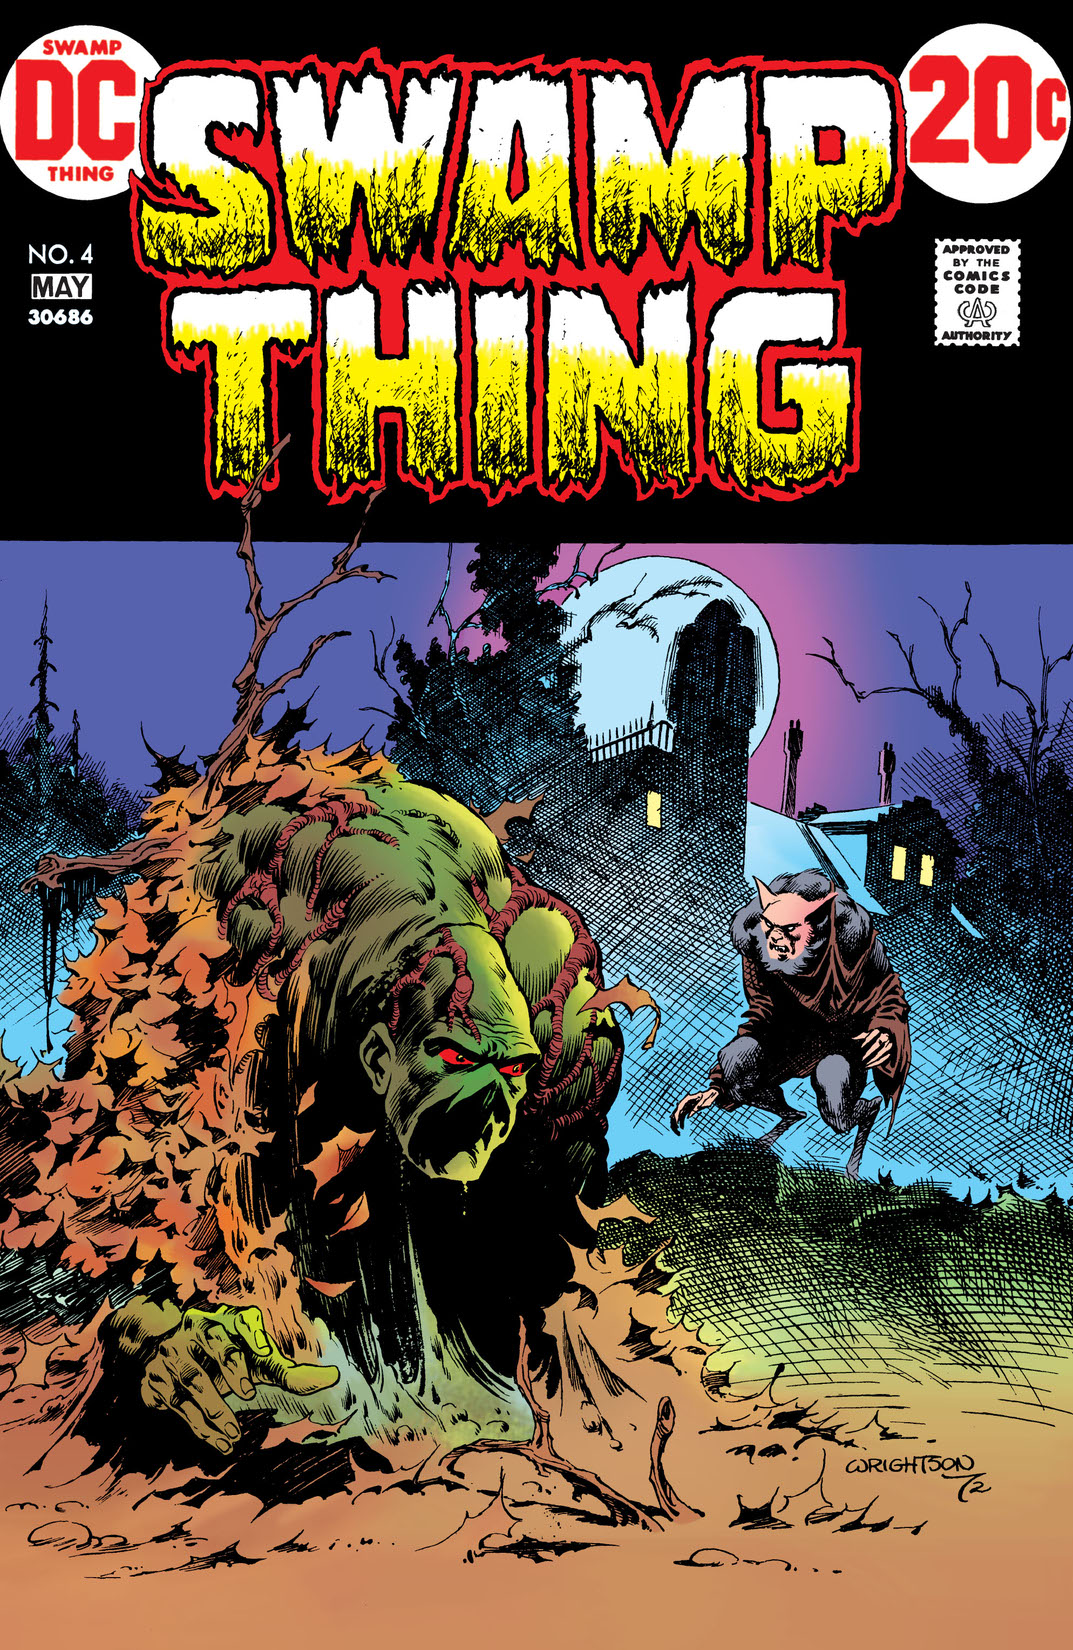 Swamp Thing (1972-) #4 preview images